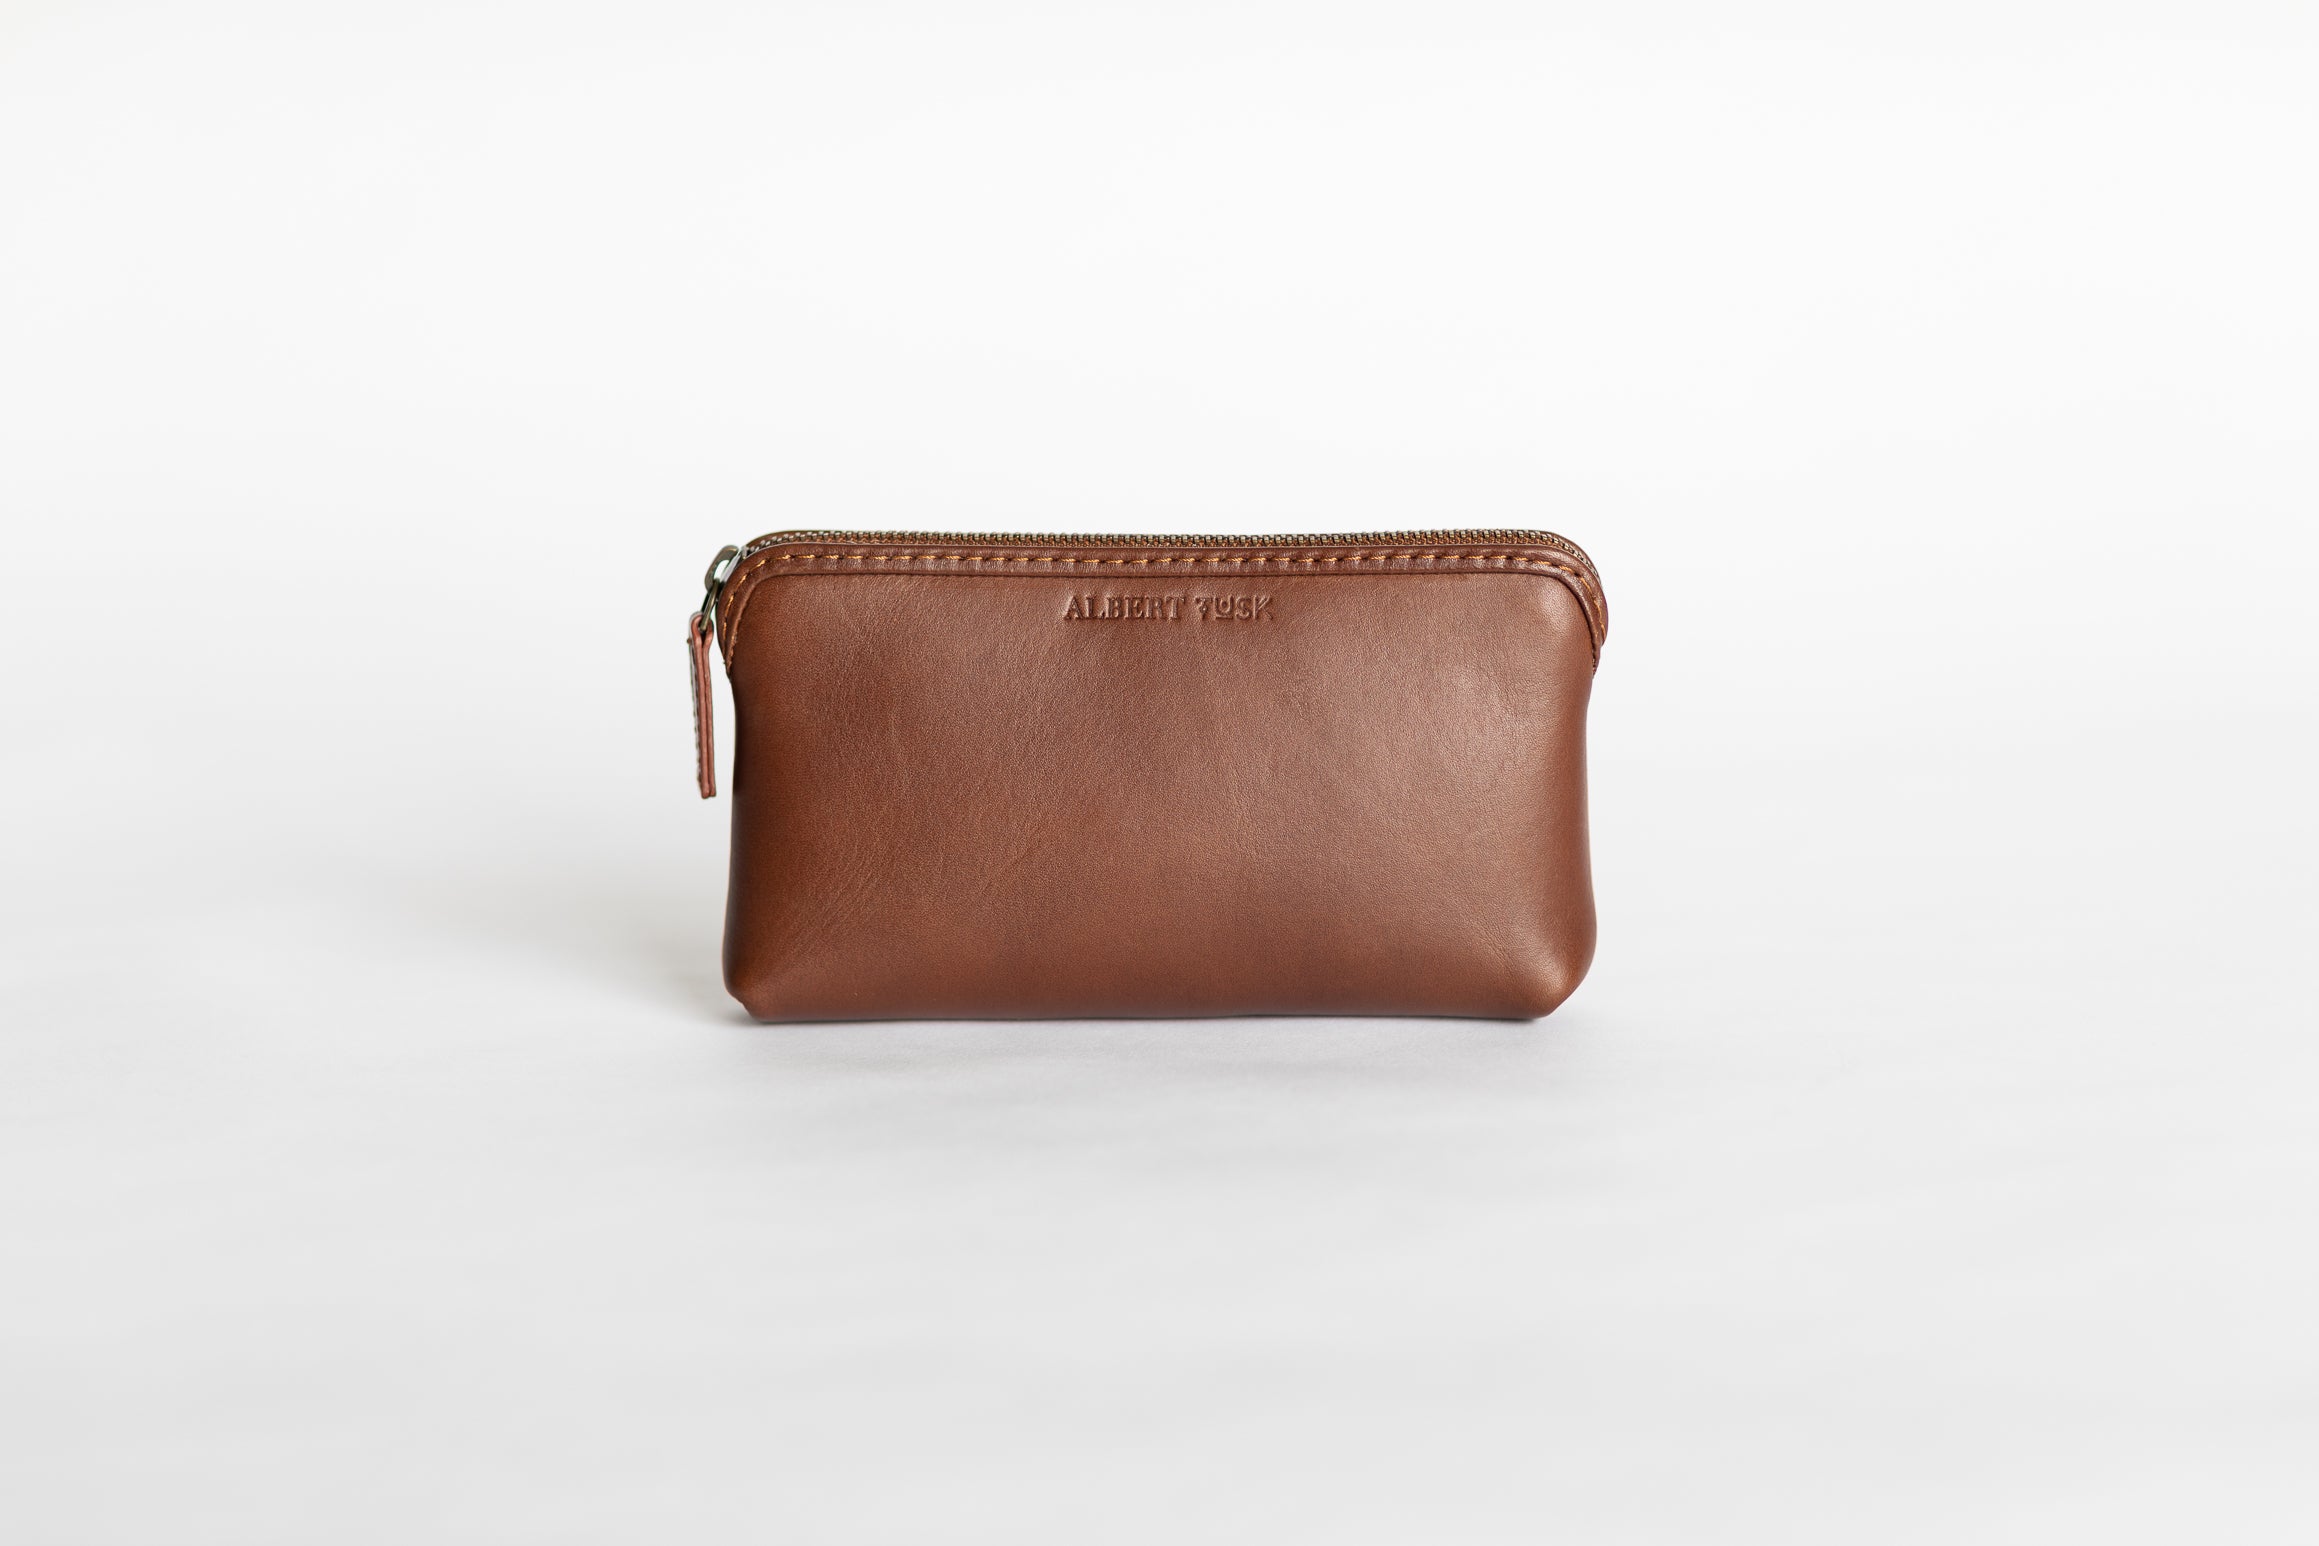 Tan Vegan Leather Vault Pouch Buy At DailyObjects